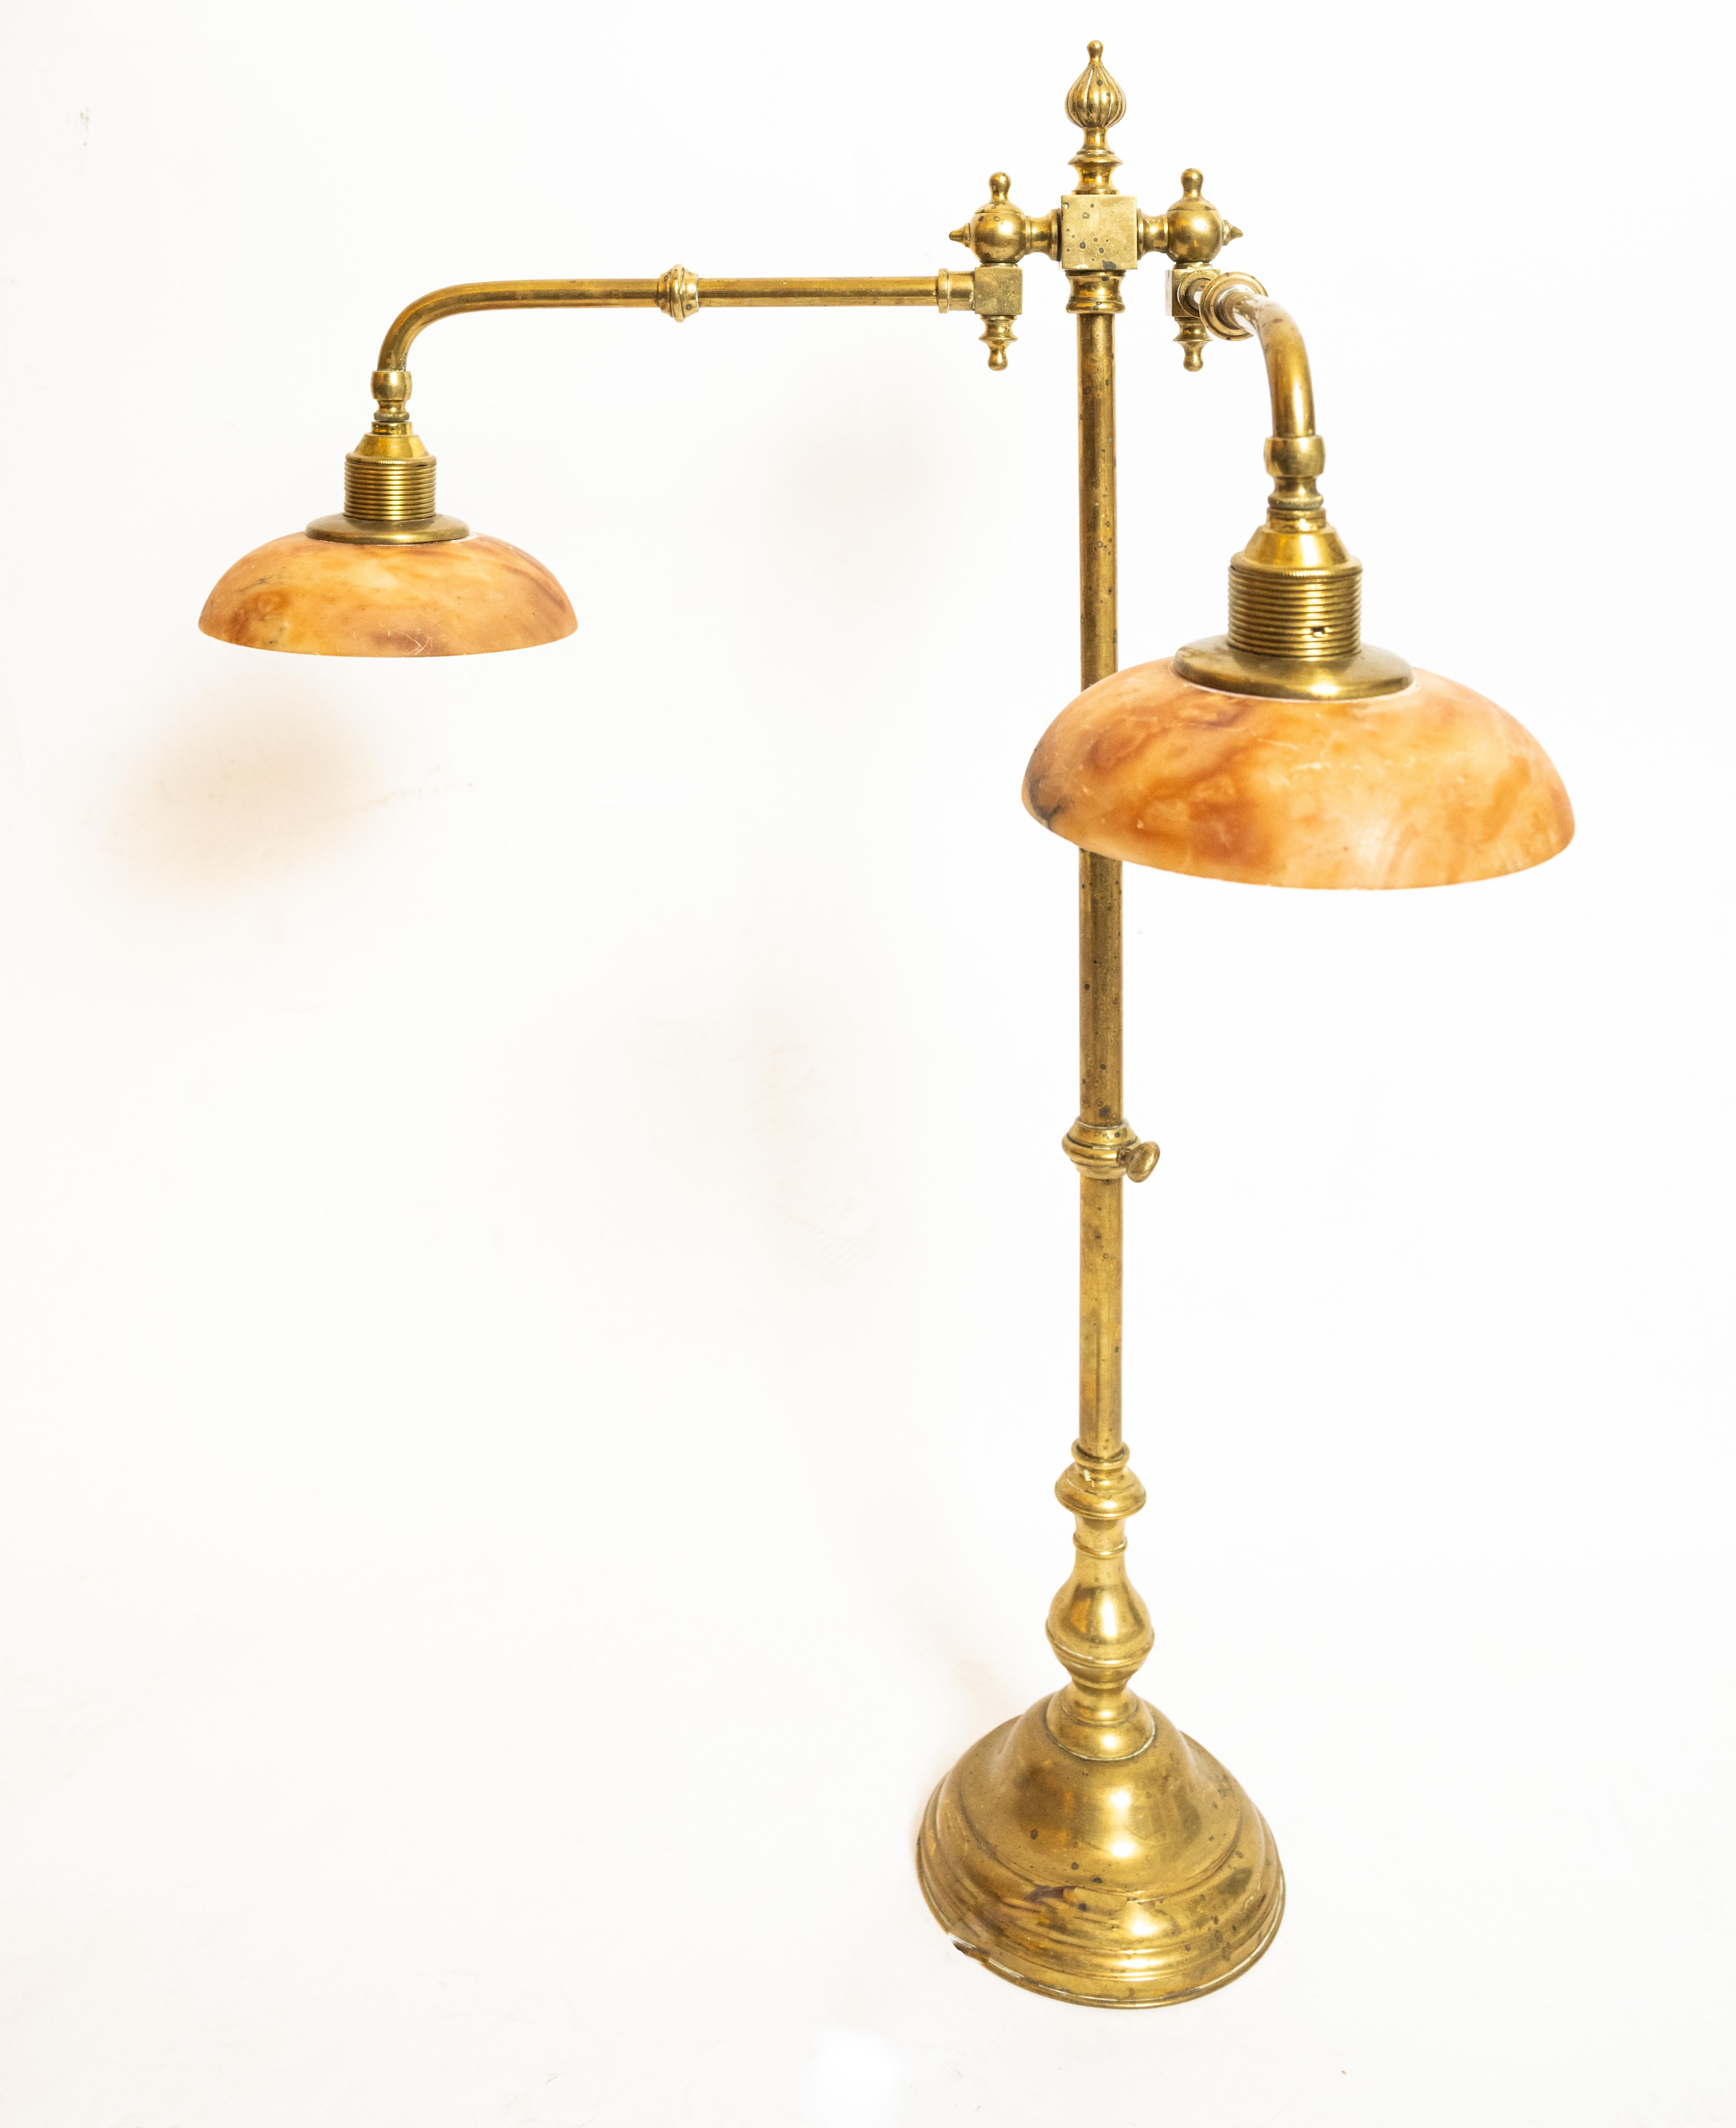 Late 19th-Century English library table lamp. The round base supporting a stem with baluster shaped elements. The two arms are adjustable and fitted with caramel colored turned alabaster shades. The finish features a light patina. 2 sockets, each